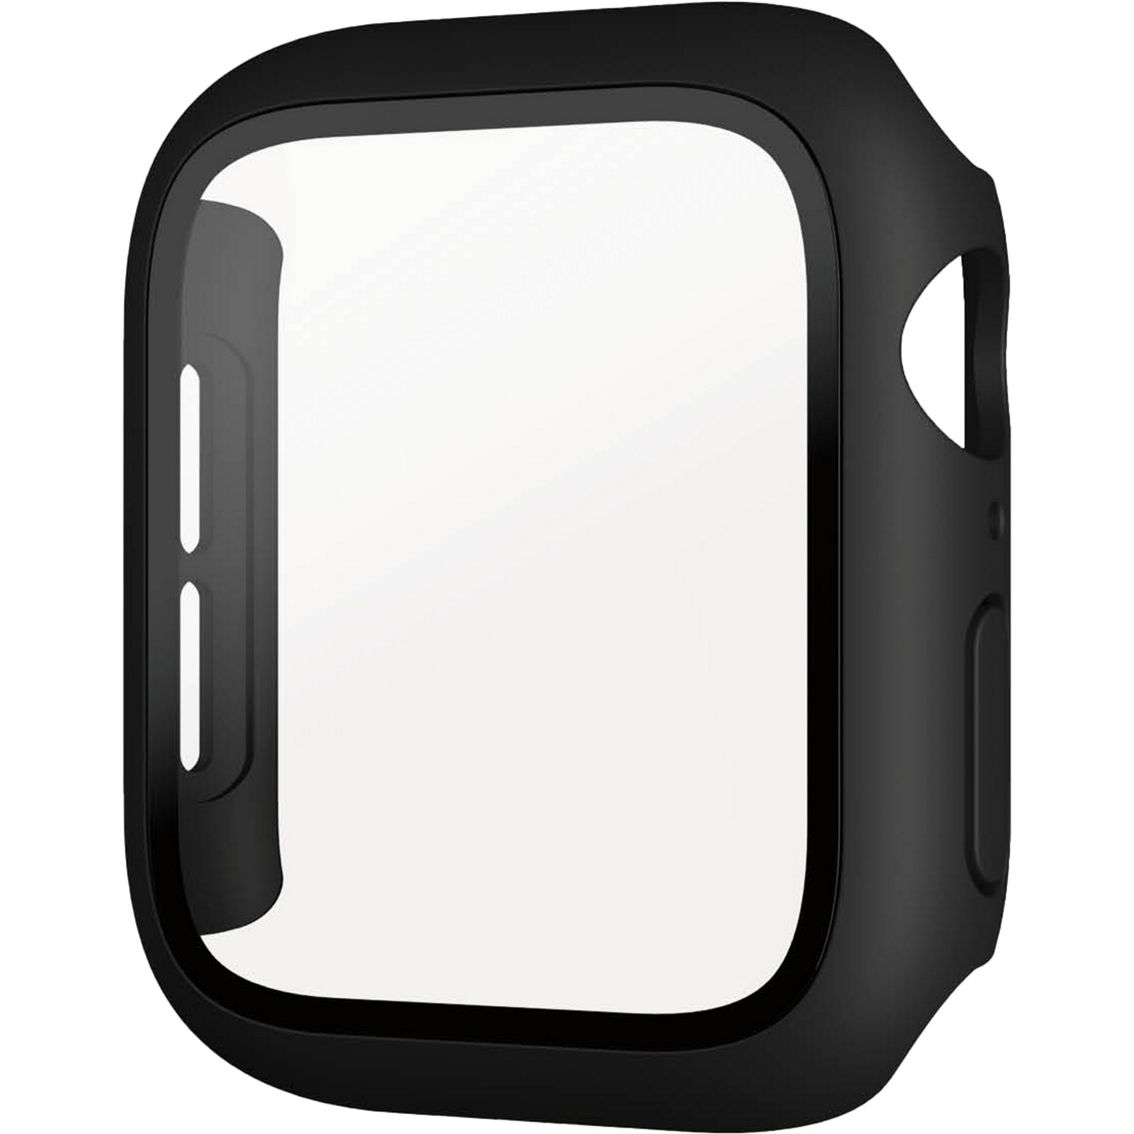 Panzer Glass Full Body Black Screen Protector for Apple Watch 4, 5, 6 and SE 44mm - Image 6 of 6